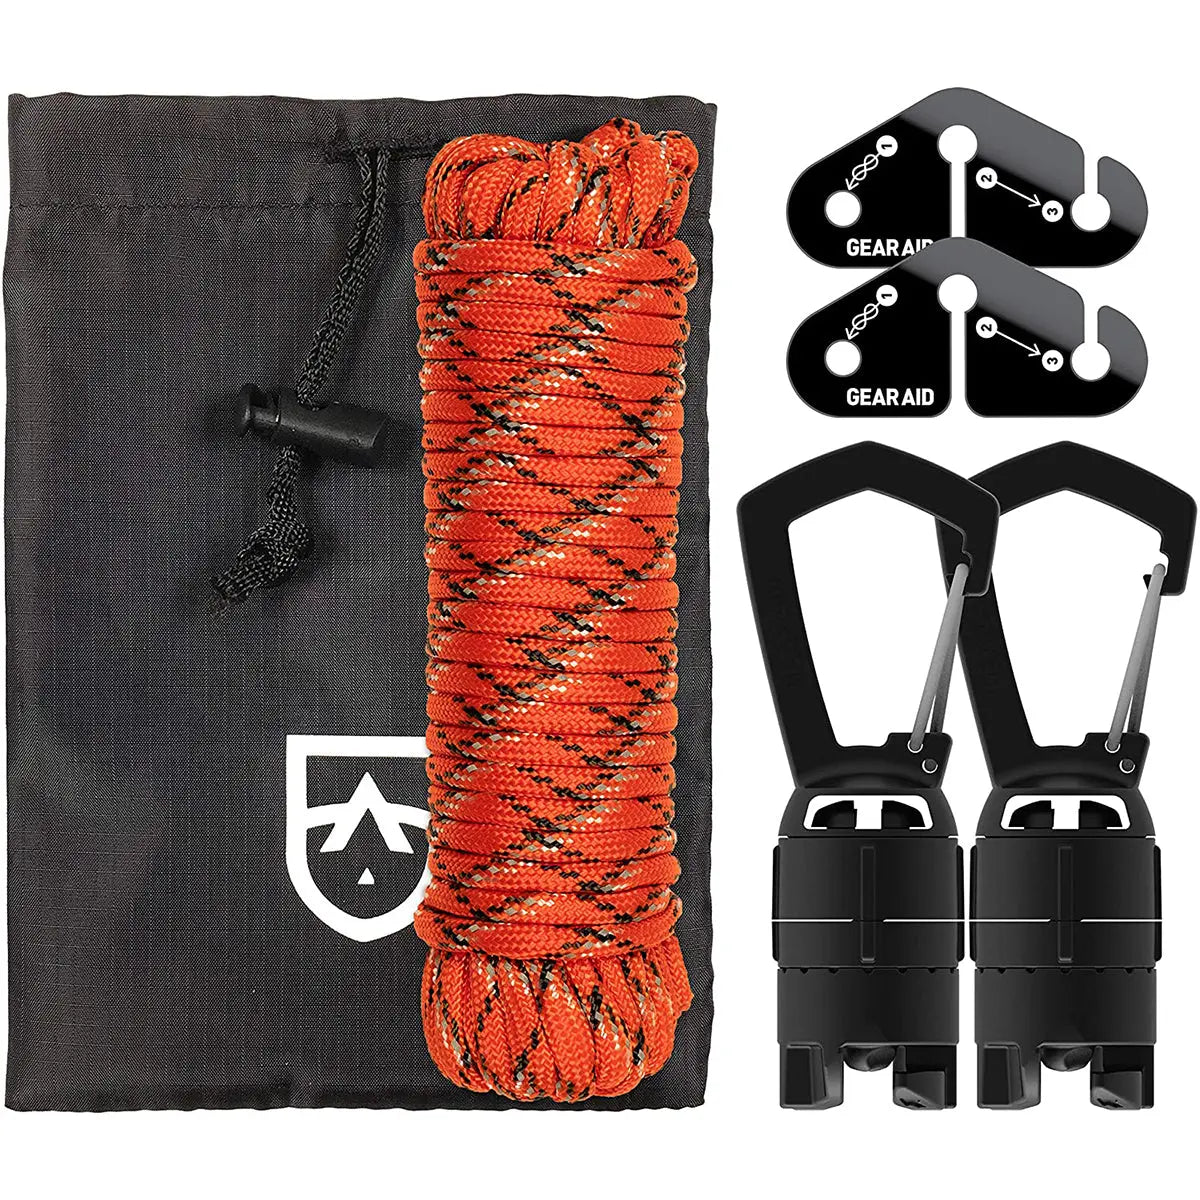 Gear Aid Multi-Purpose Camp Line Kit for Hanging and Drying Gear Gear Aid